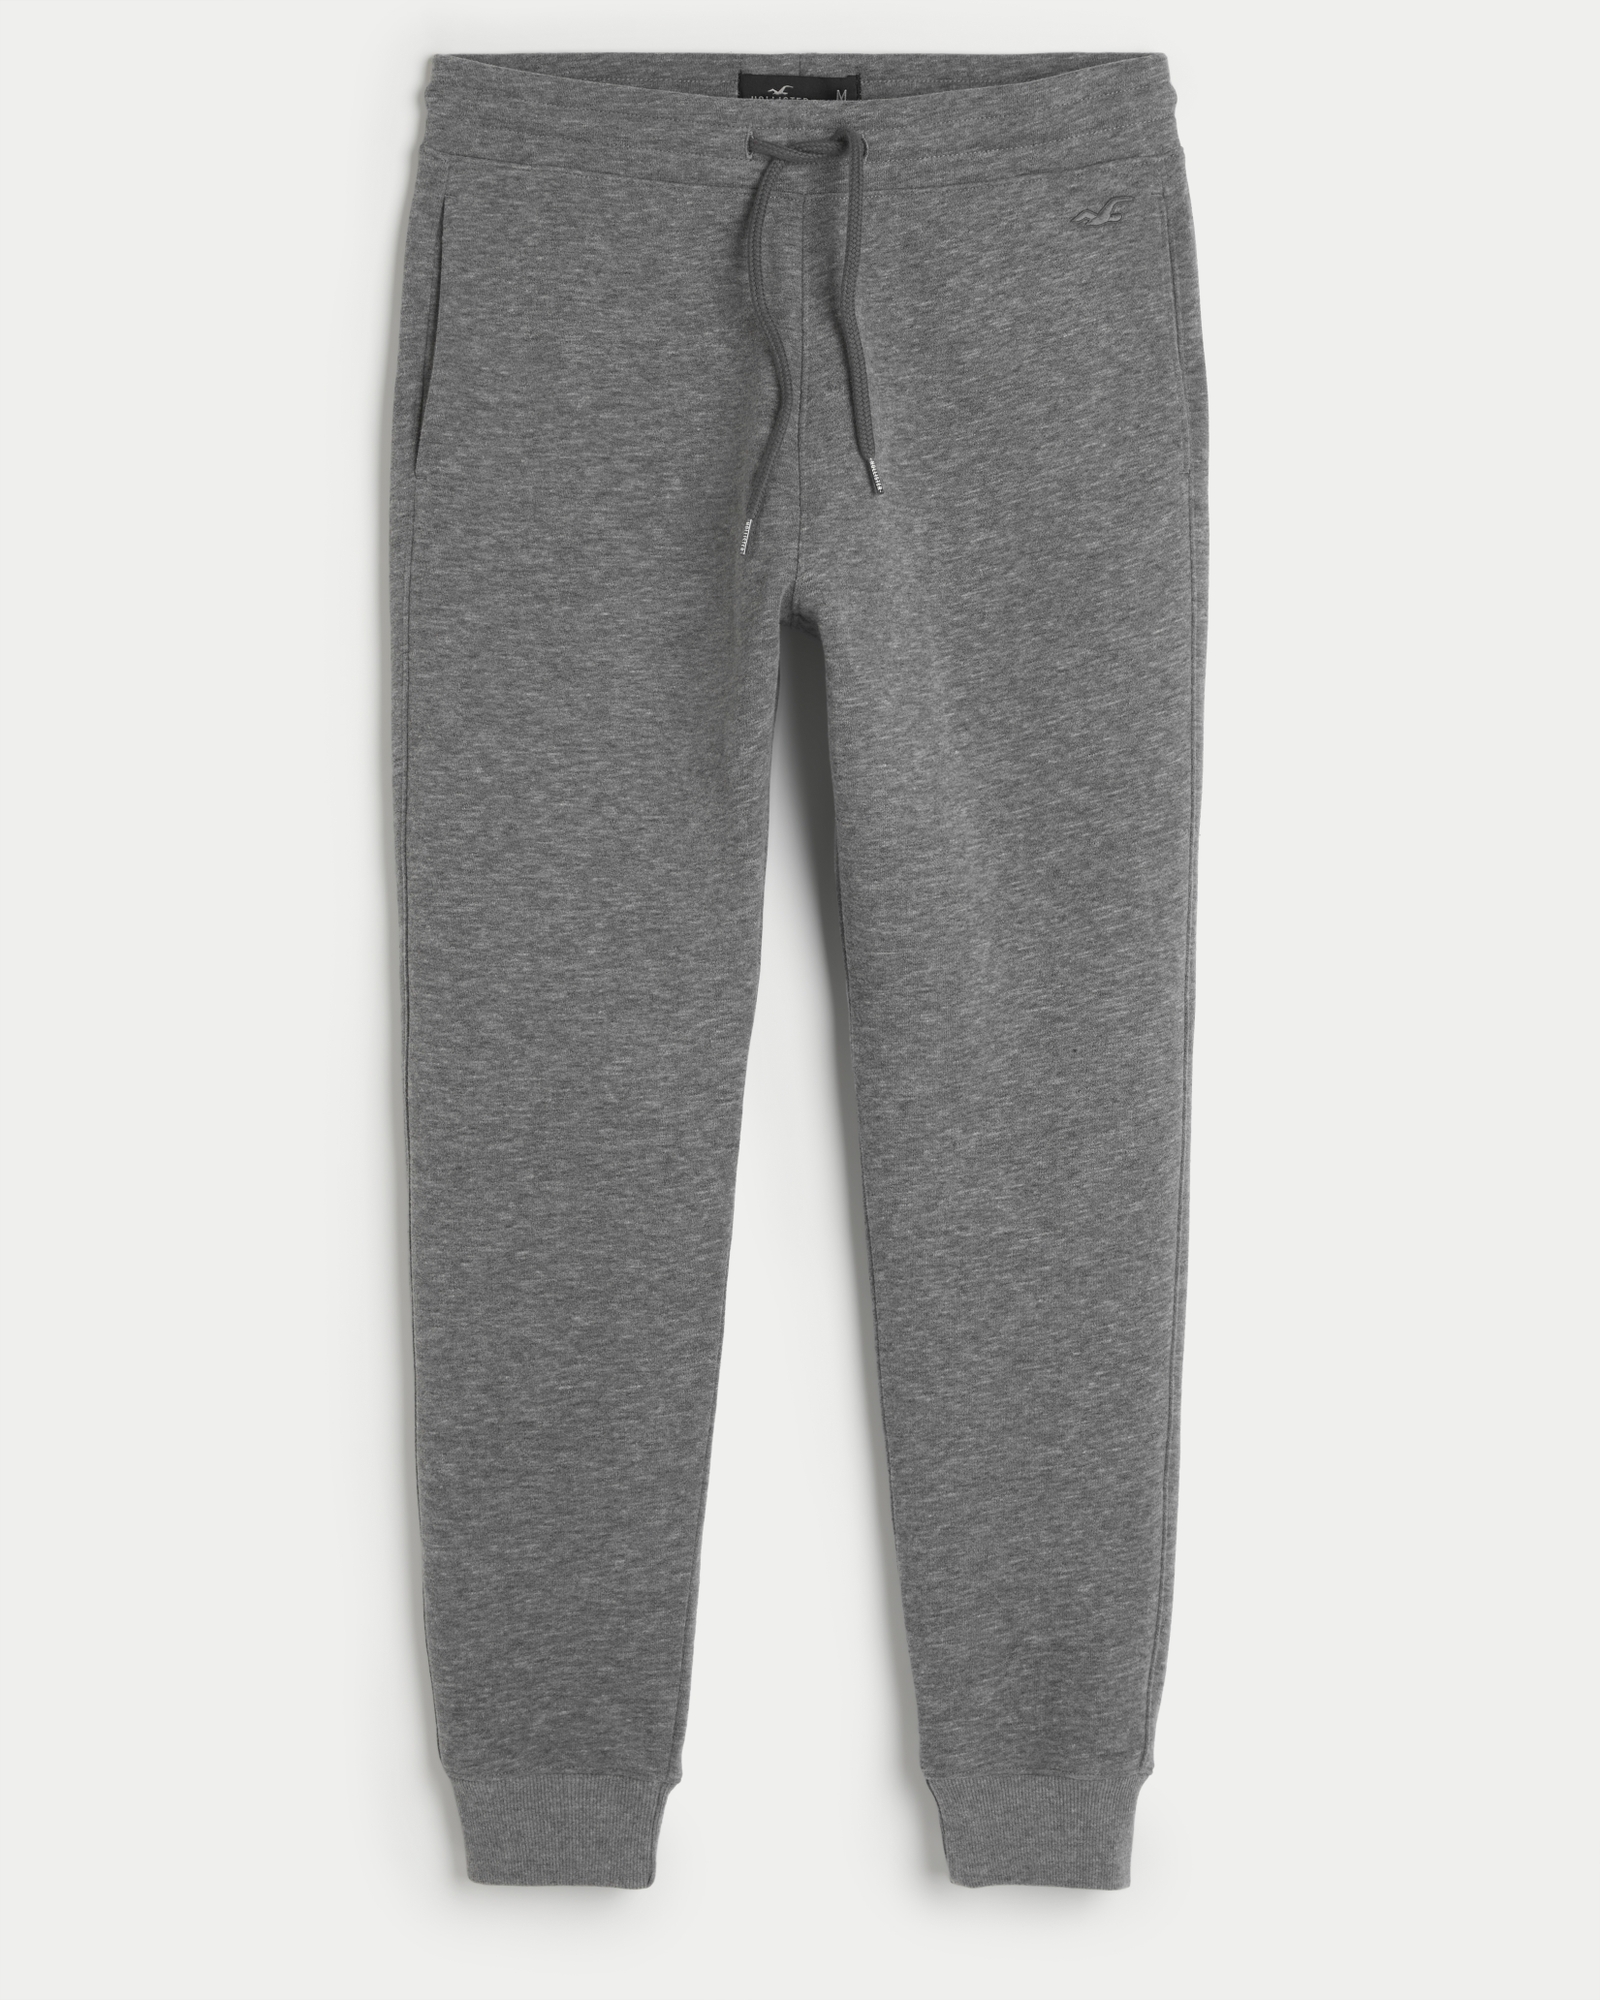 NWT HOLLISTER MEN's Relaxed Fleece Embroidered Graphic Joggers, size XL